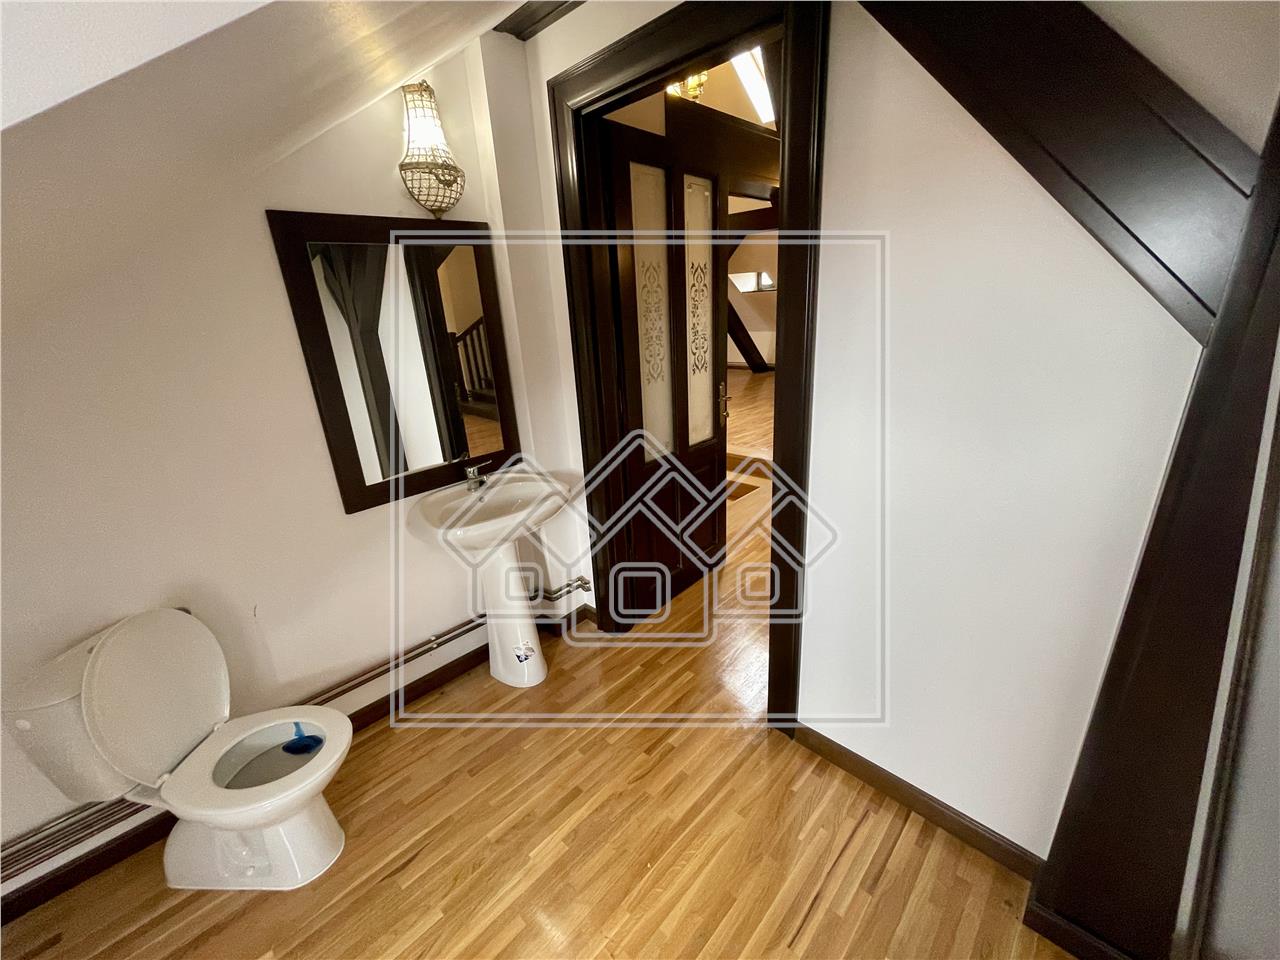 Office space for rent in Sibiu - Victoriei Area